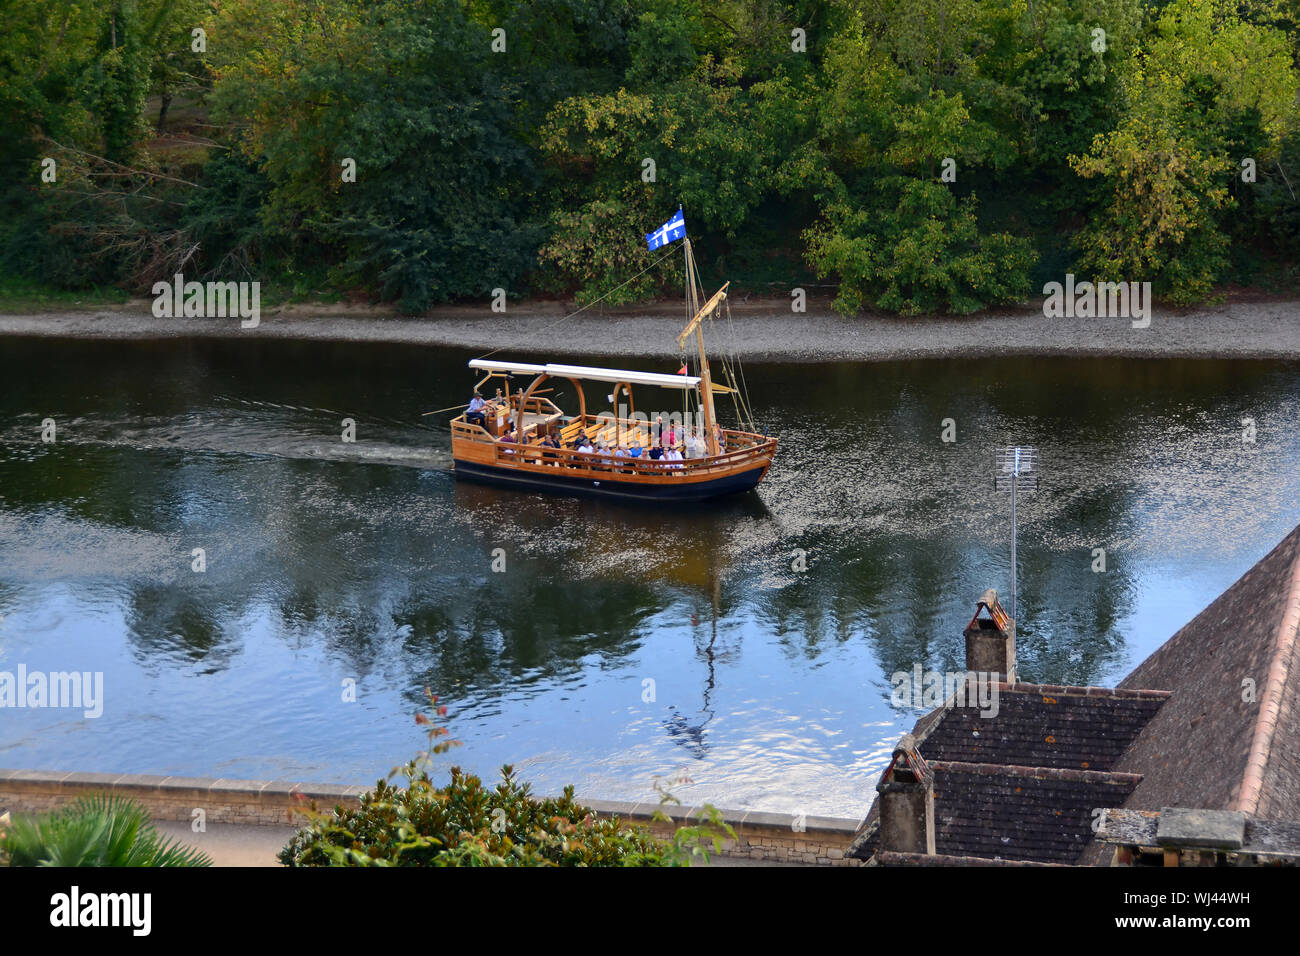 A traditional flat bottomed Scow, known locally as a Gabarre on the River Dordogne, France. Used for transporting tourists on the shallow river Stock Photo